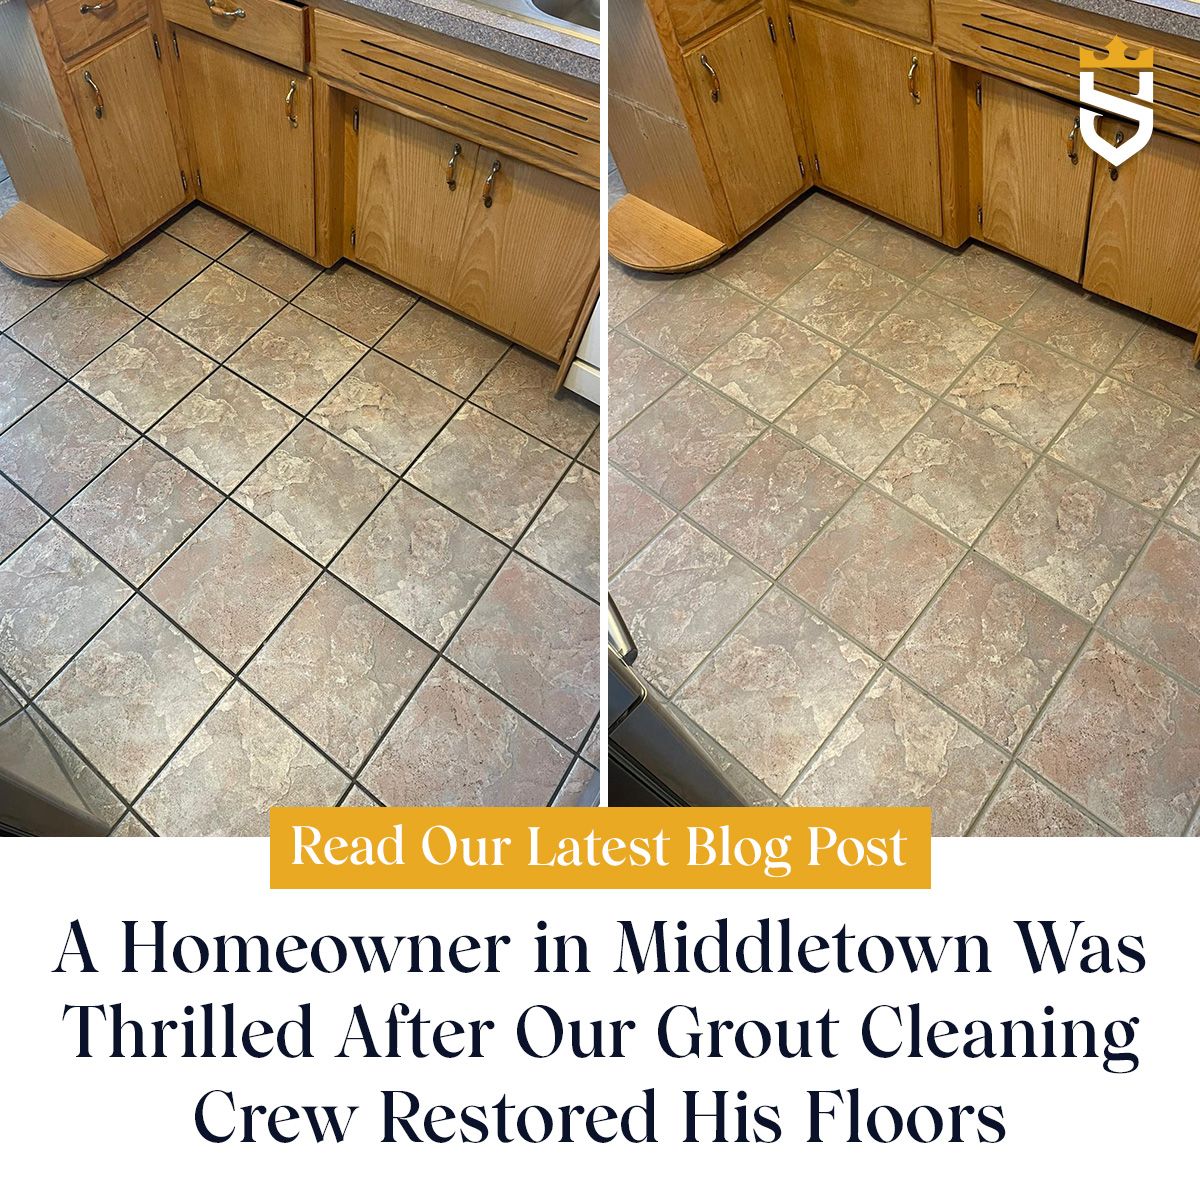 A Homeowner in Middletown Was Thrilled After Our Grout Cleaning Crew Restored His Floors